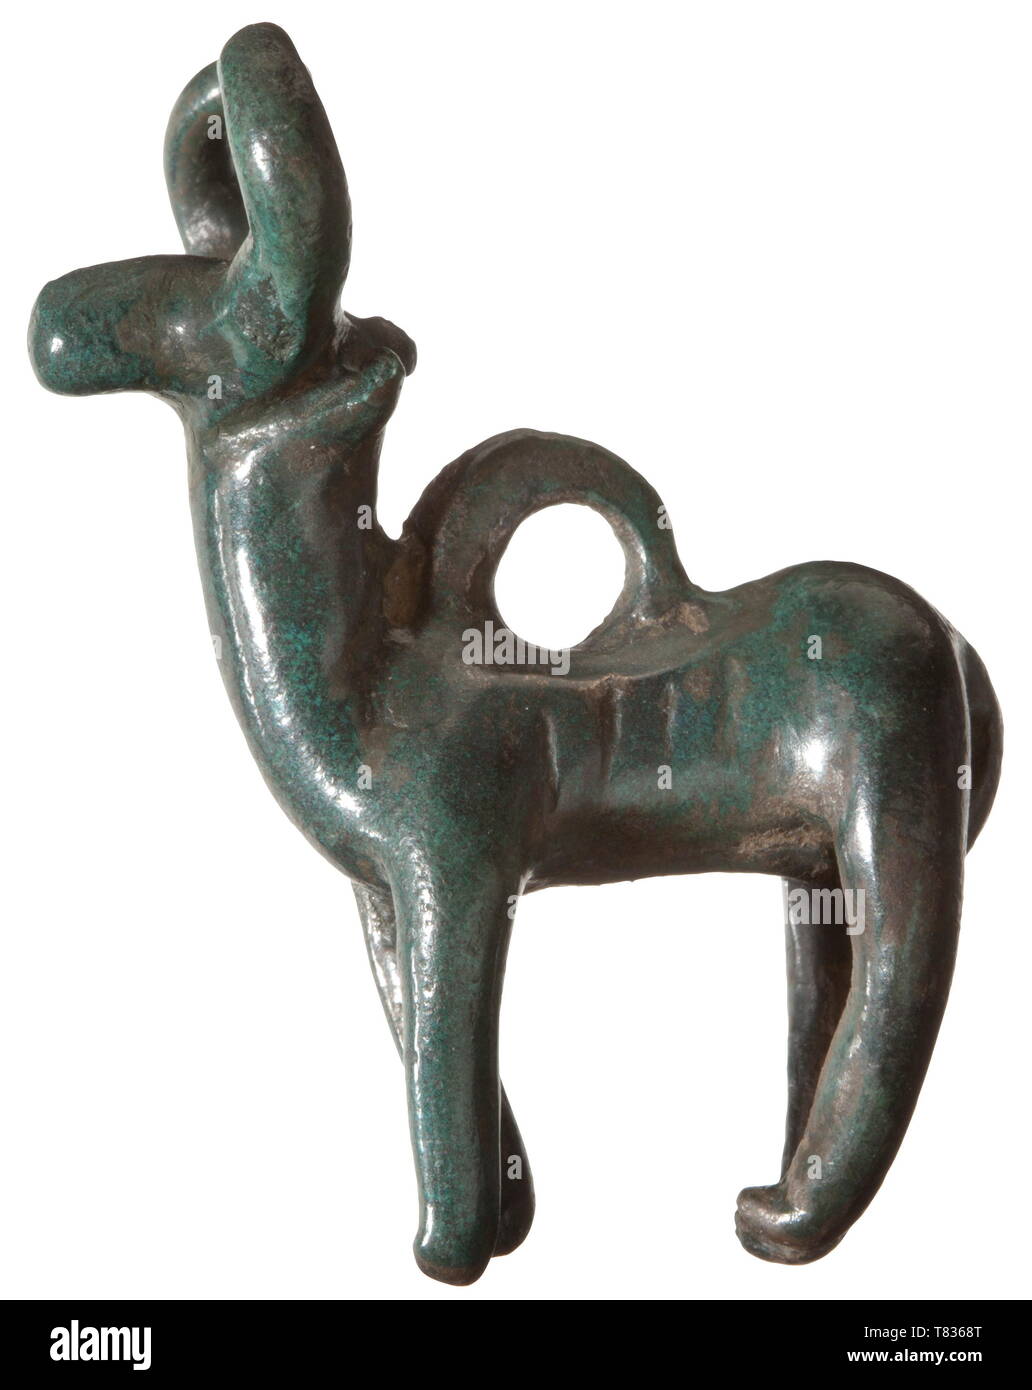 A Central European bronze ox Bronze Age, circa 1000 BC. Bronze with fine emerald patina. Three-dimensionally shaped stylised ox with inward bent horns and closed legs. Suspension ring on the back. Fine condition and patina. Provenance: South German private collection, 1970s and later. historic, historical, prehistory, Additional-Rights-Clearance-Info-Not-Available Stock Photo